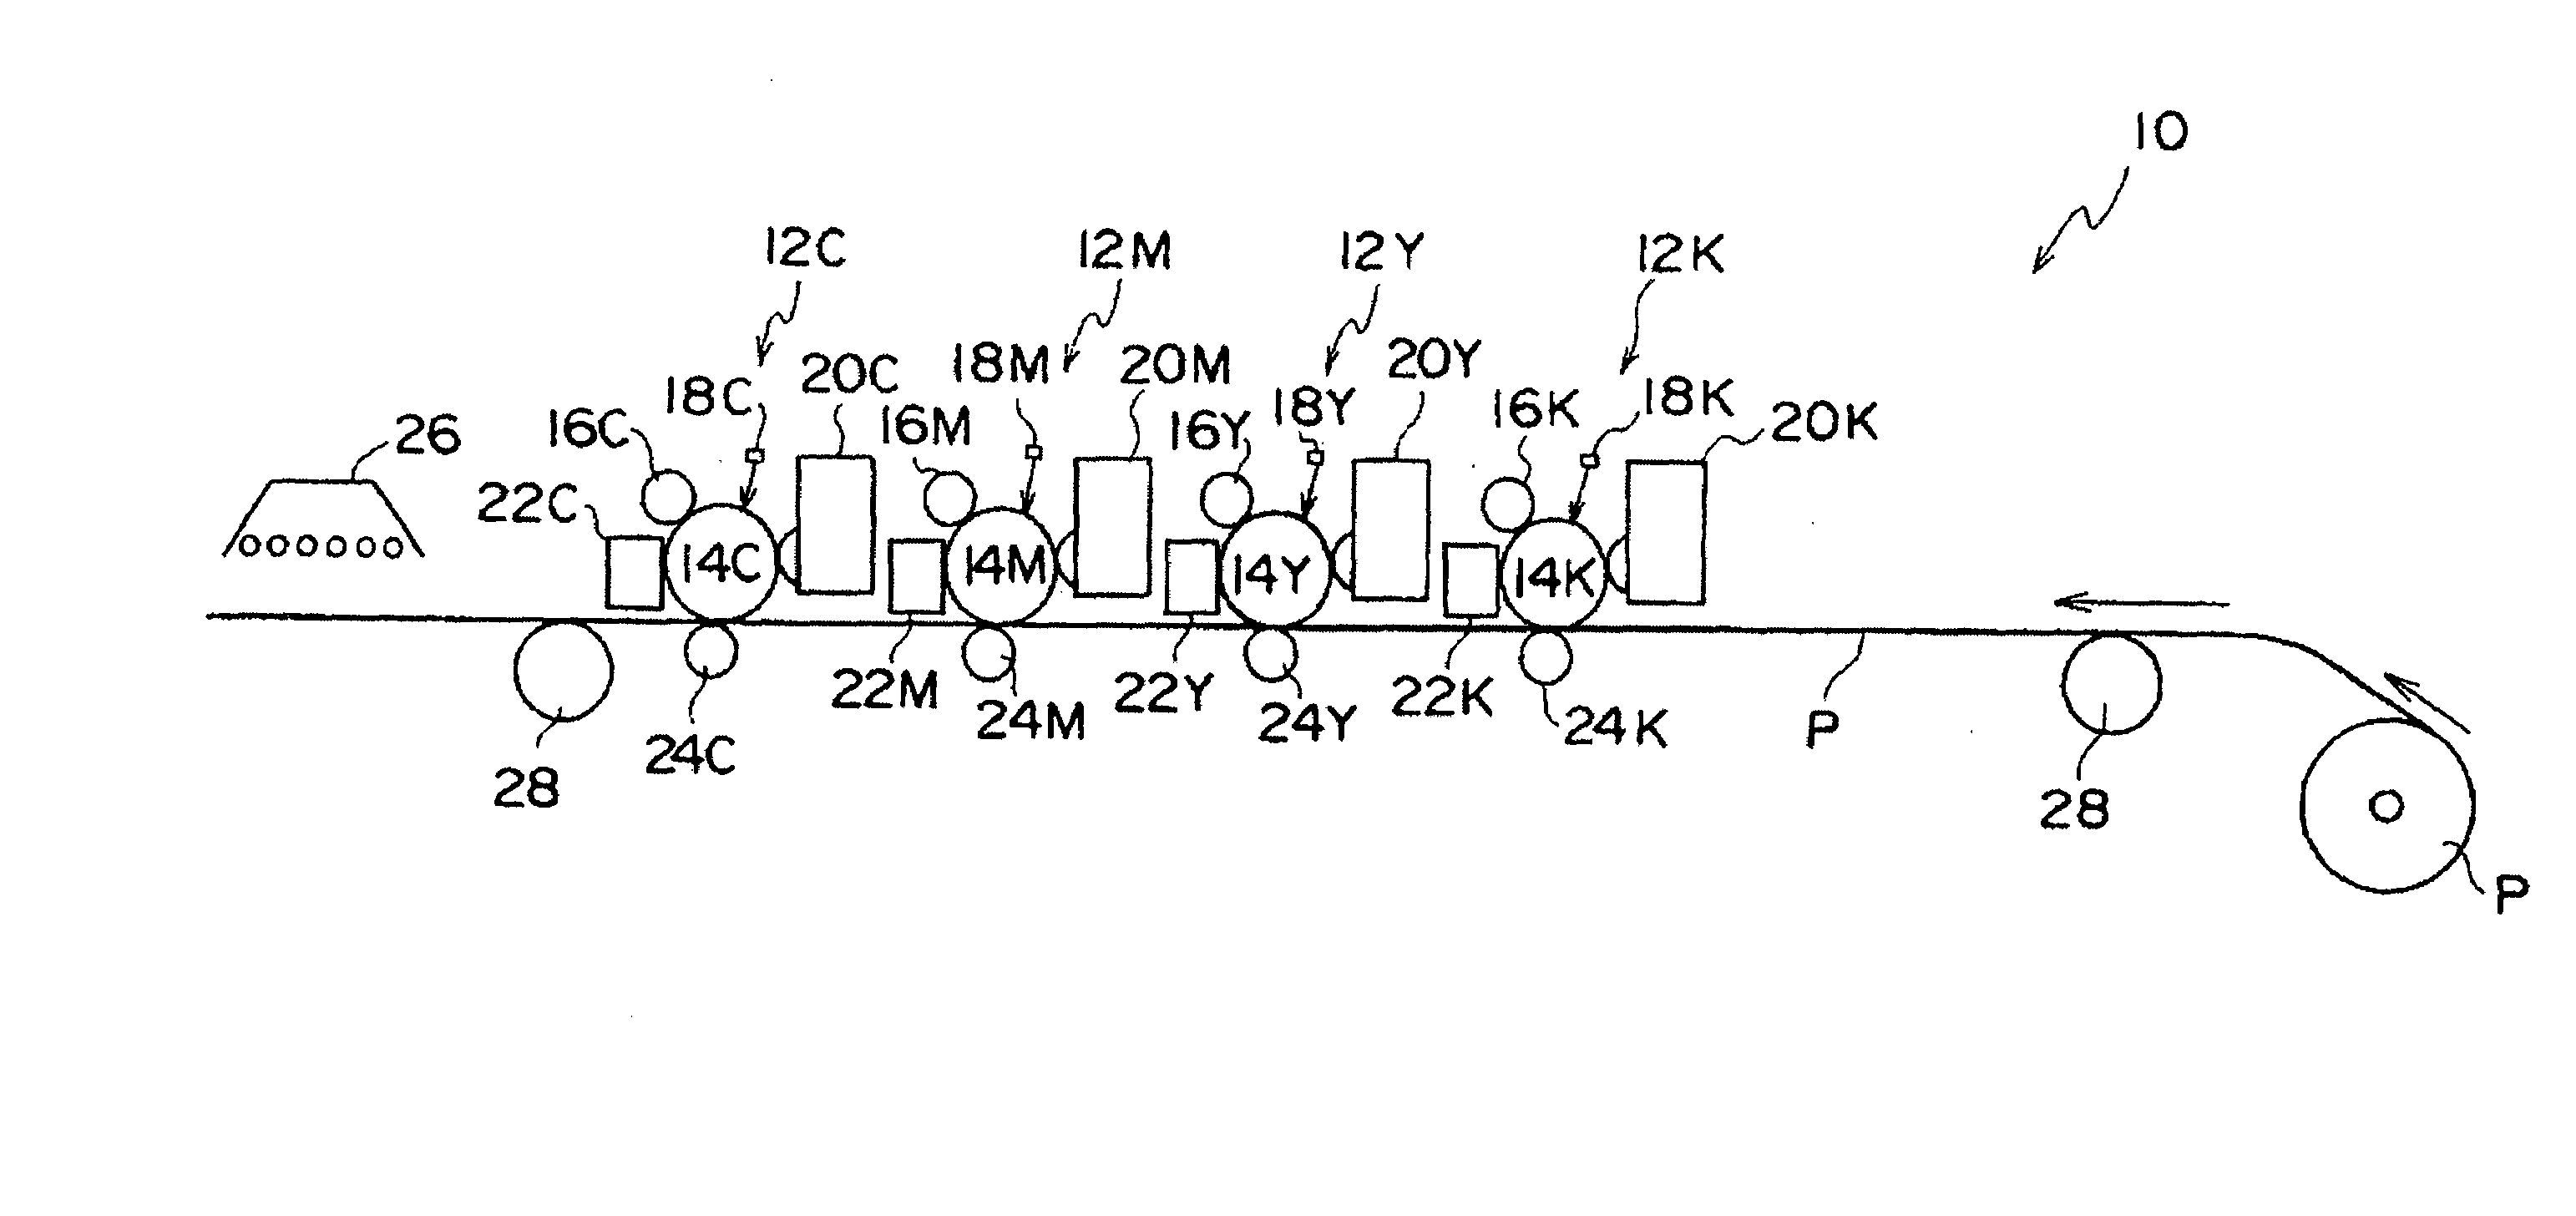 Electrophotographic toner and image forming apparatus